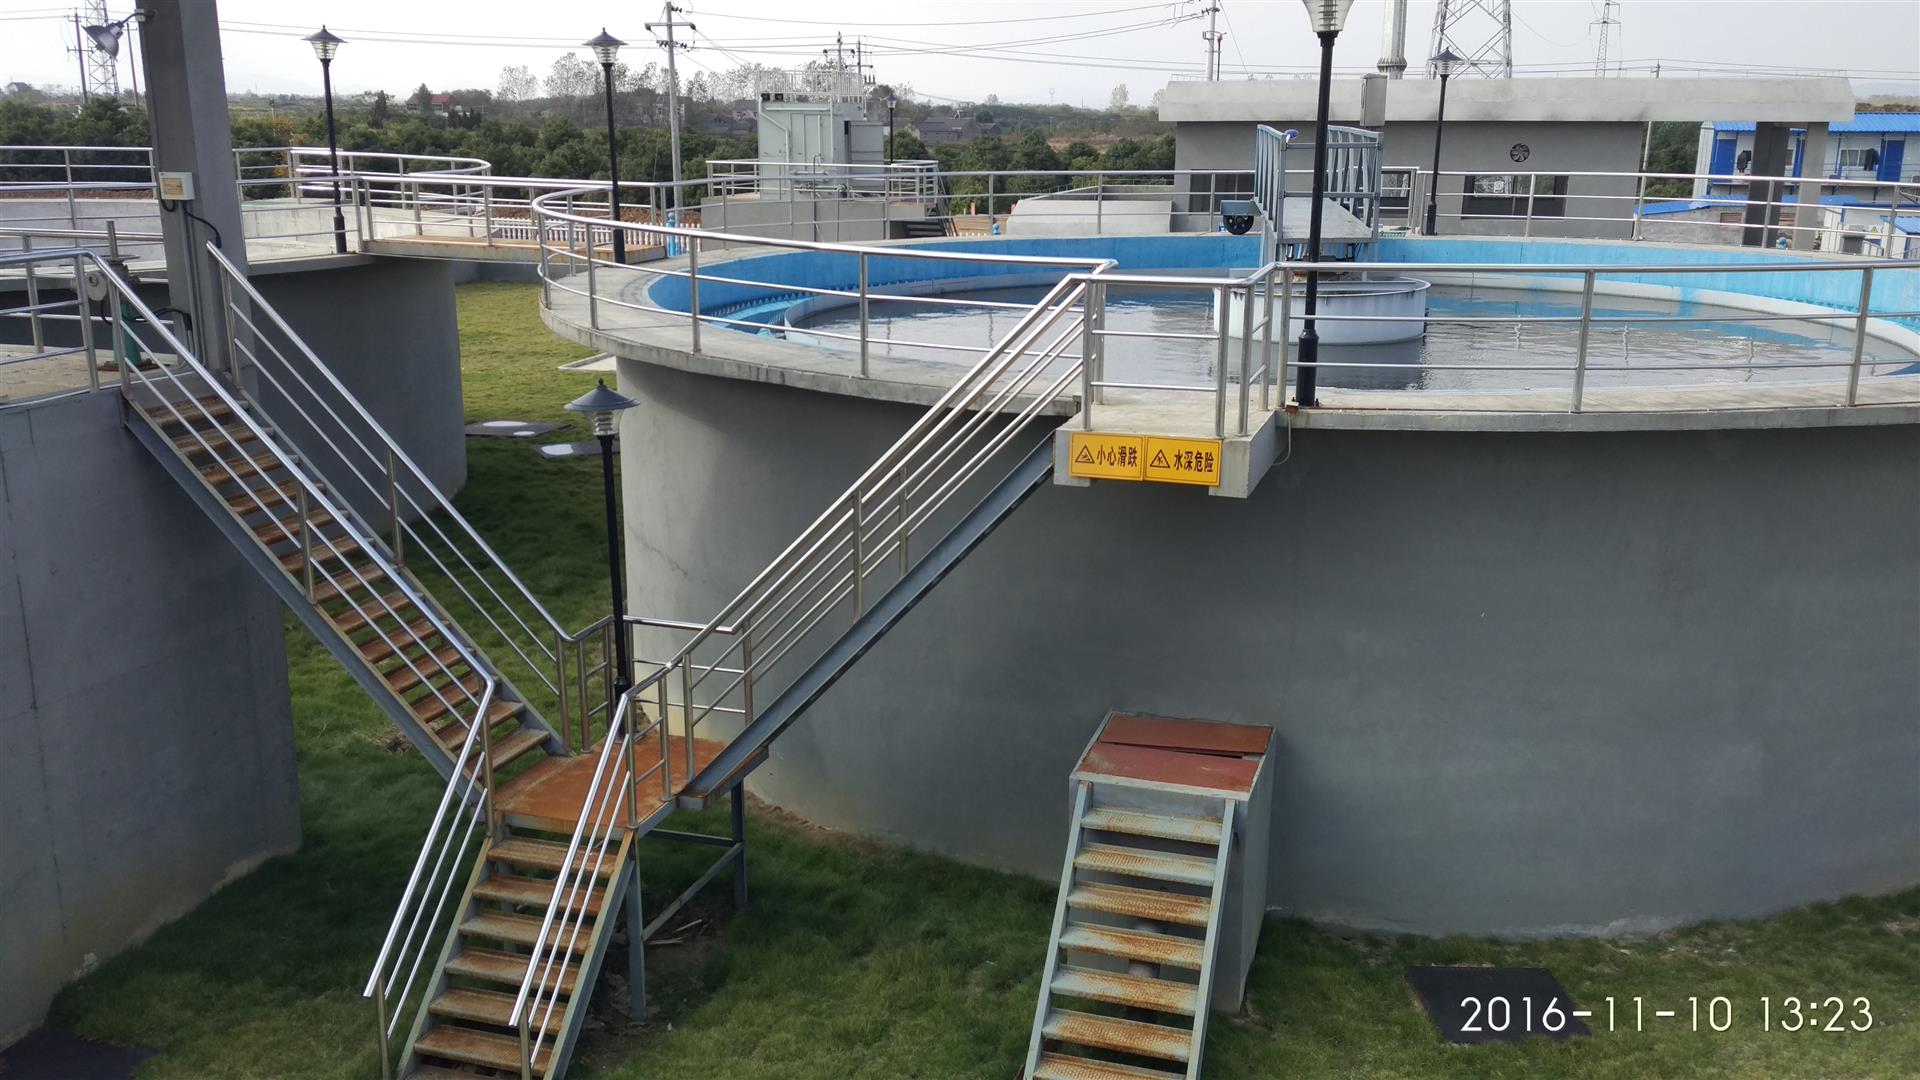 Water treatment plant tank, AVK valves outbattling harsh conditions